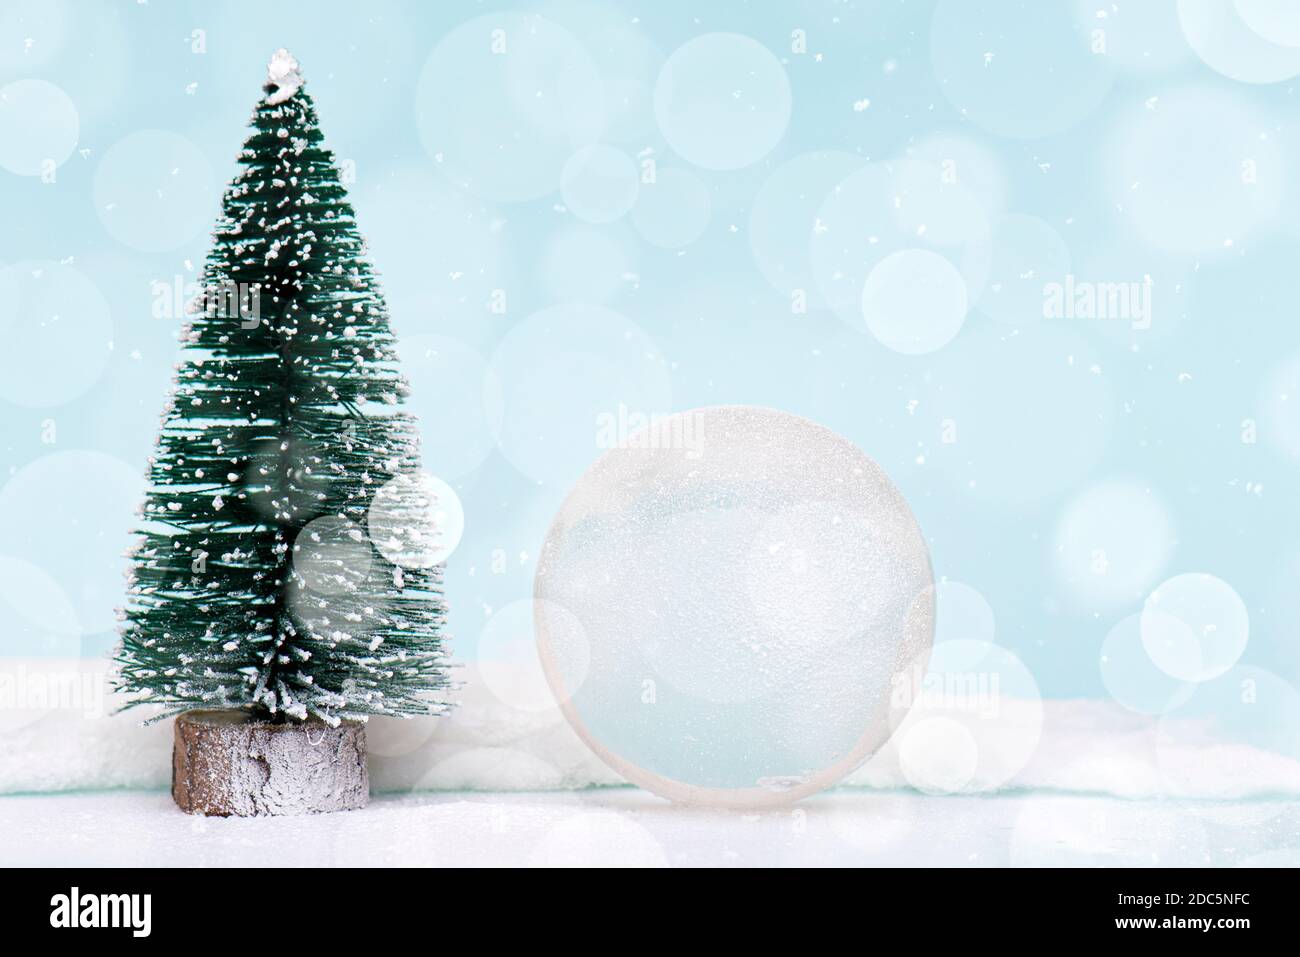 Christmas or New Year composition, decoration with glass ball snow globe and fir tree covered by snow on glitter background Stock Photo